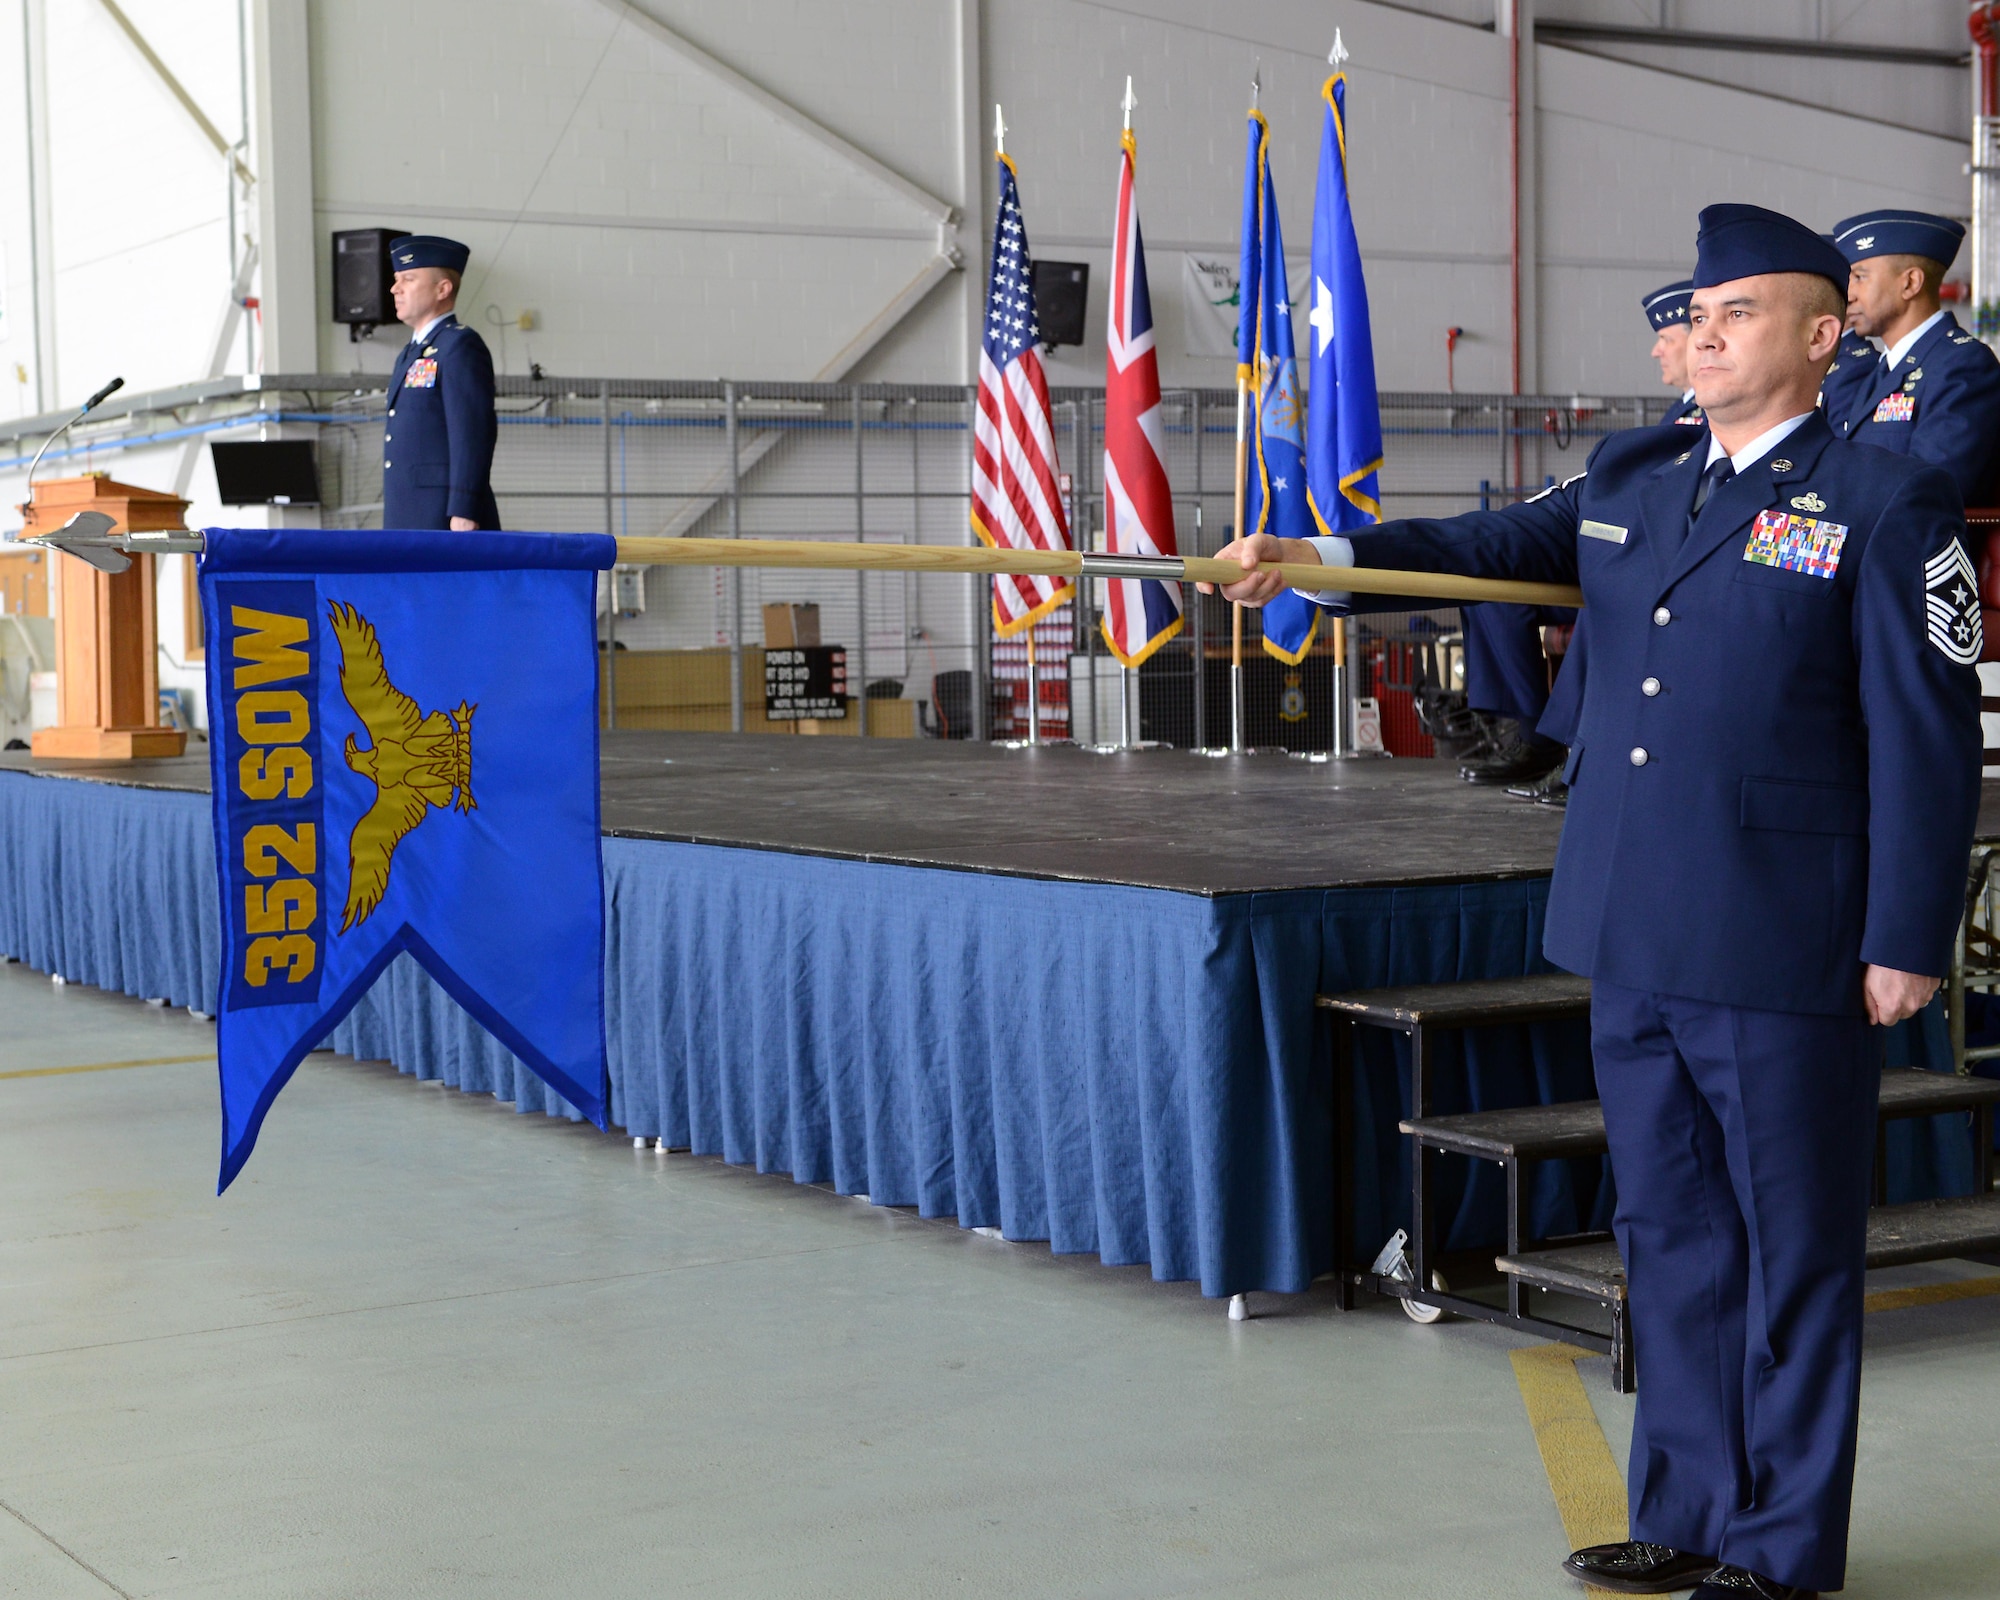 U.S. Air Force Chief Master Sgt. Robert Gibbons II presents the 352nd Special Operations Wing guideon during the 352nd SOW redesignation ceremony March 23, 2015, held in Hangar 814 on RAF Mildenhall, England. During the ceremony, the 752nd Special Operations Group and the (U.S Air Force photo by Tech. Sgt. Stacia Zachary/Released)